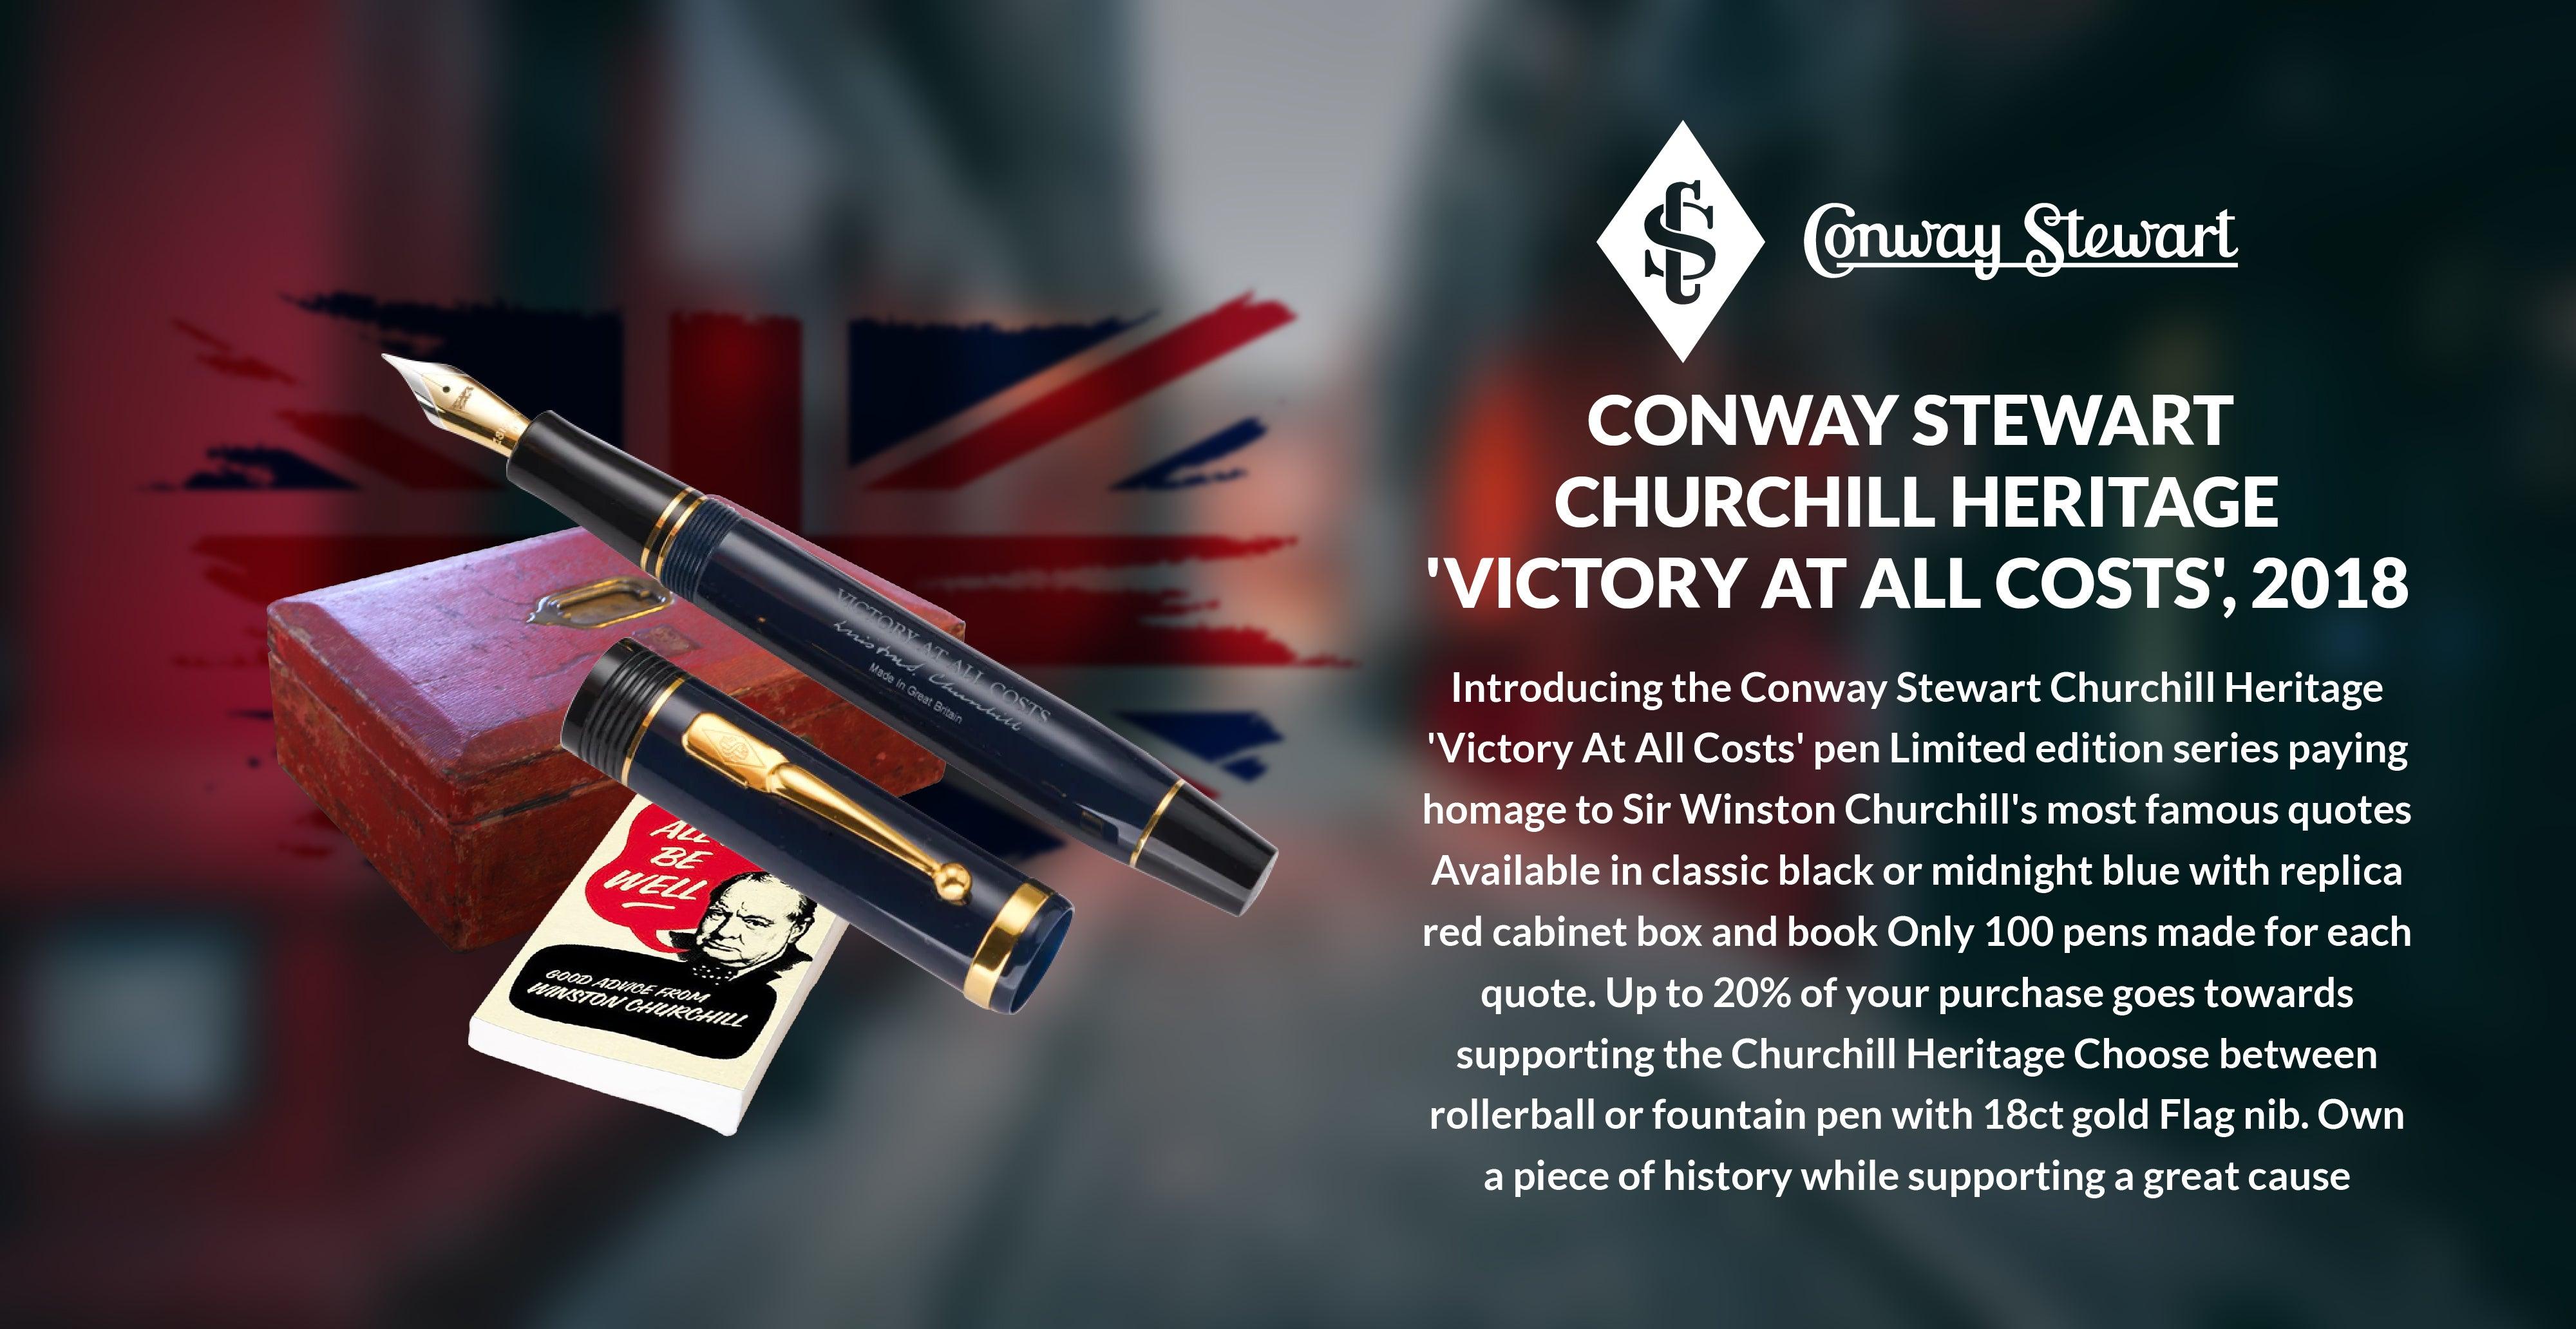 Conway Stewart Churchill Heritage 'Victory At All Costs', 2018 - Conway Stewart